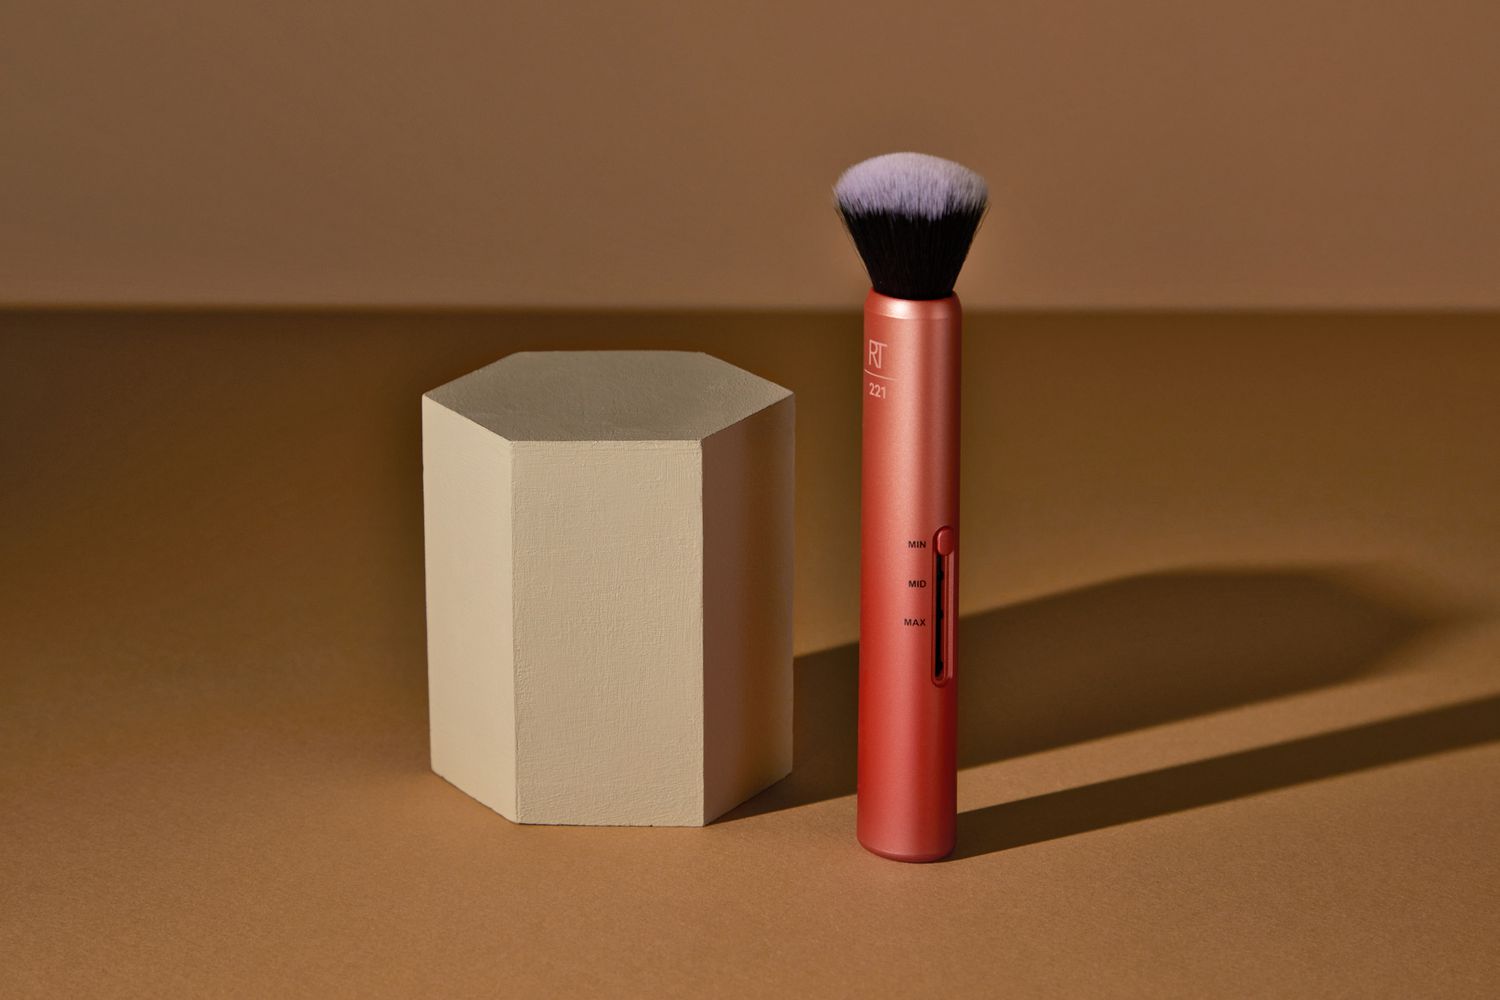 Real Techniques Custom Complexion Foundation 3-in-1 Brush standing upright next to a hexagon block